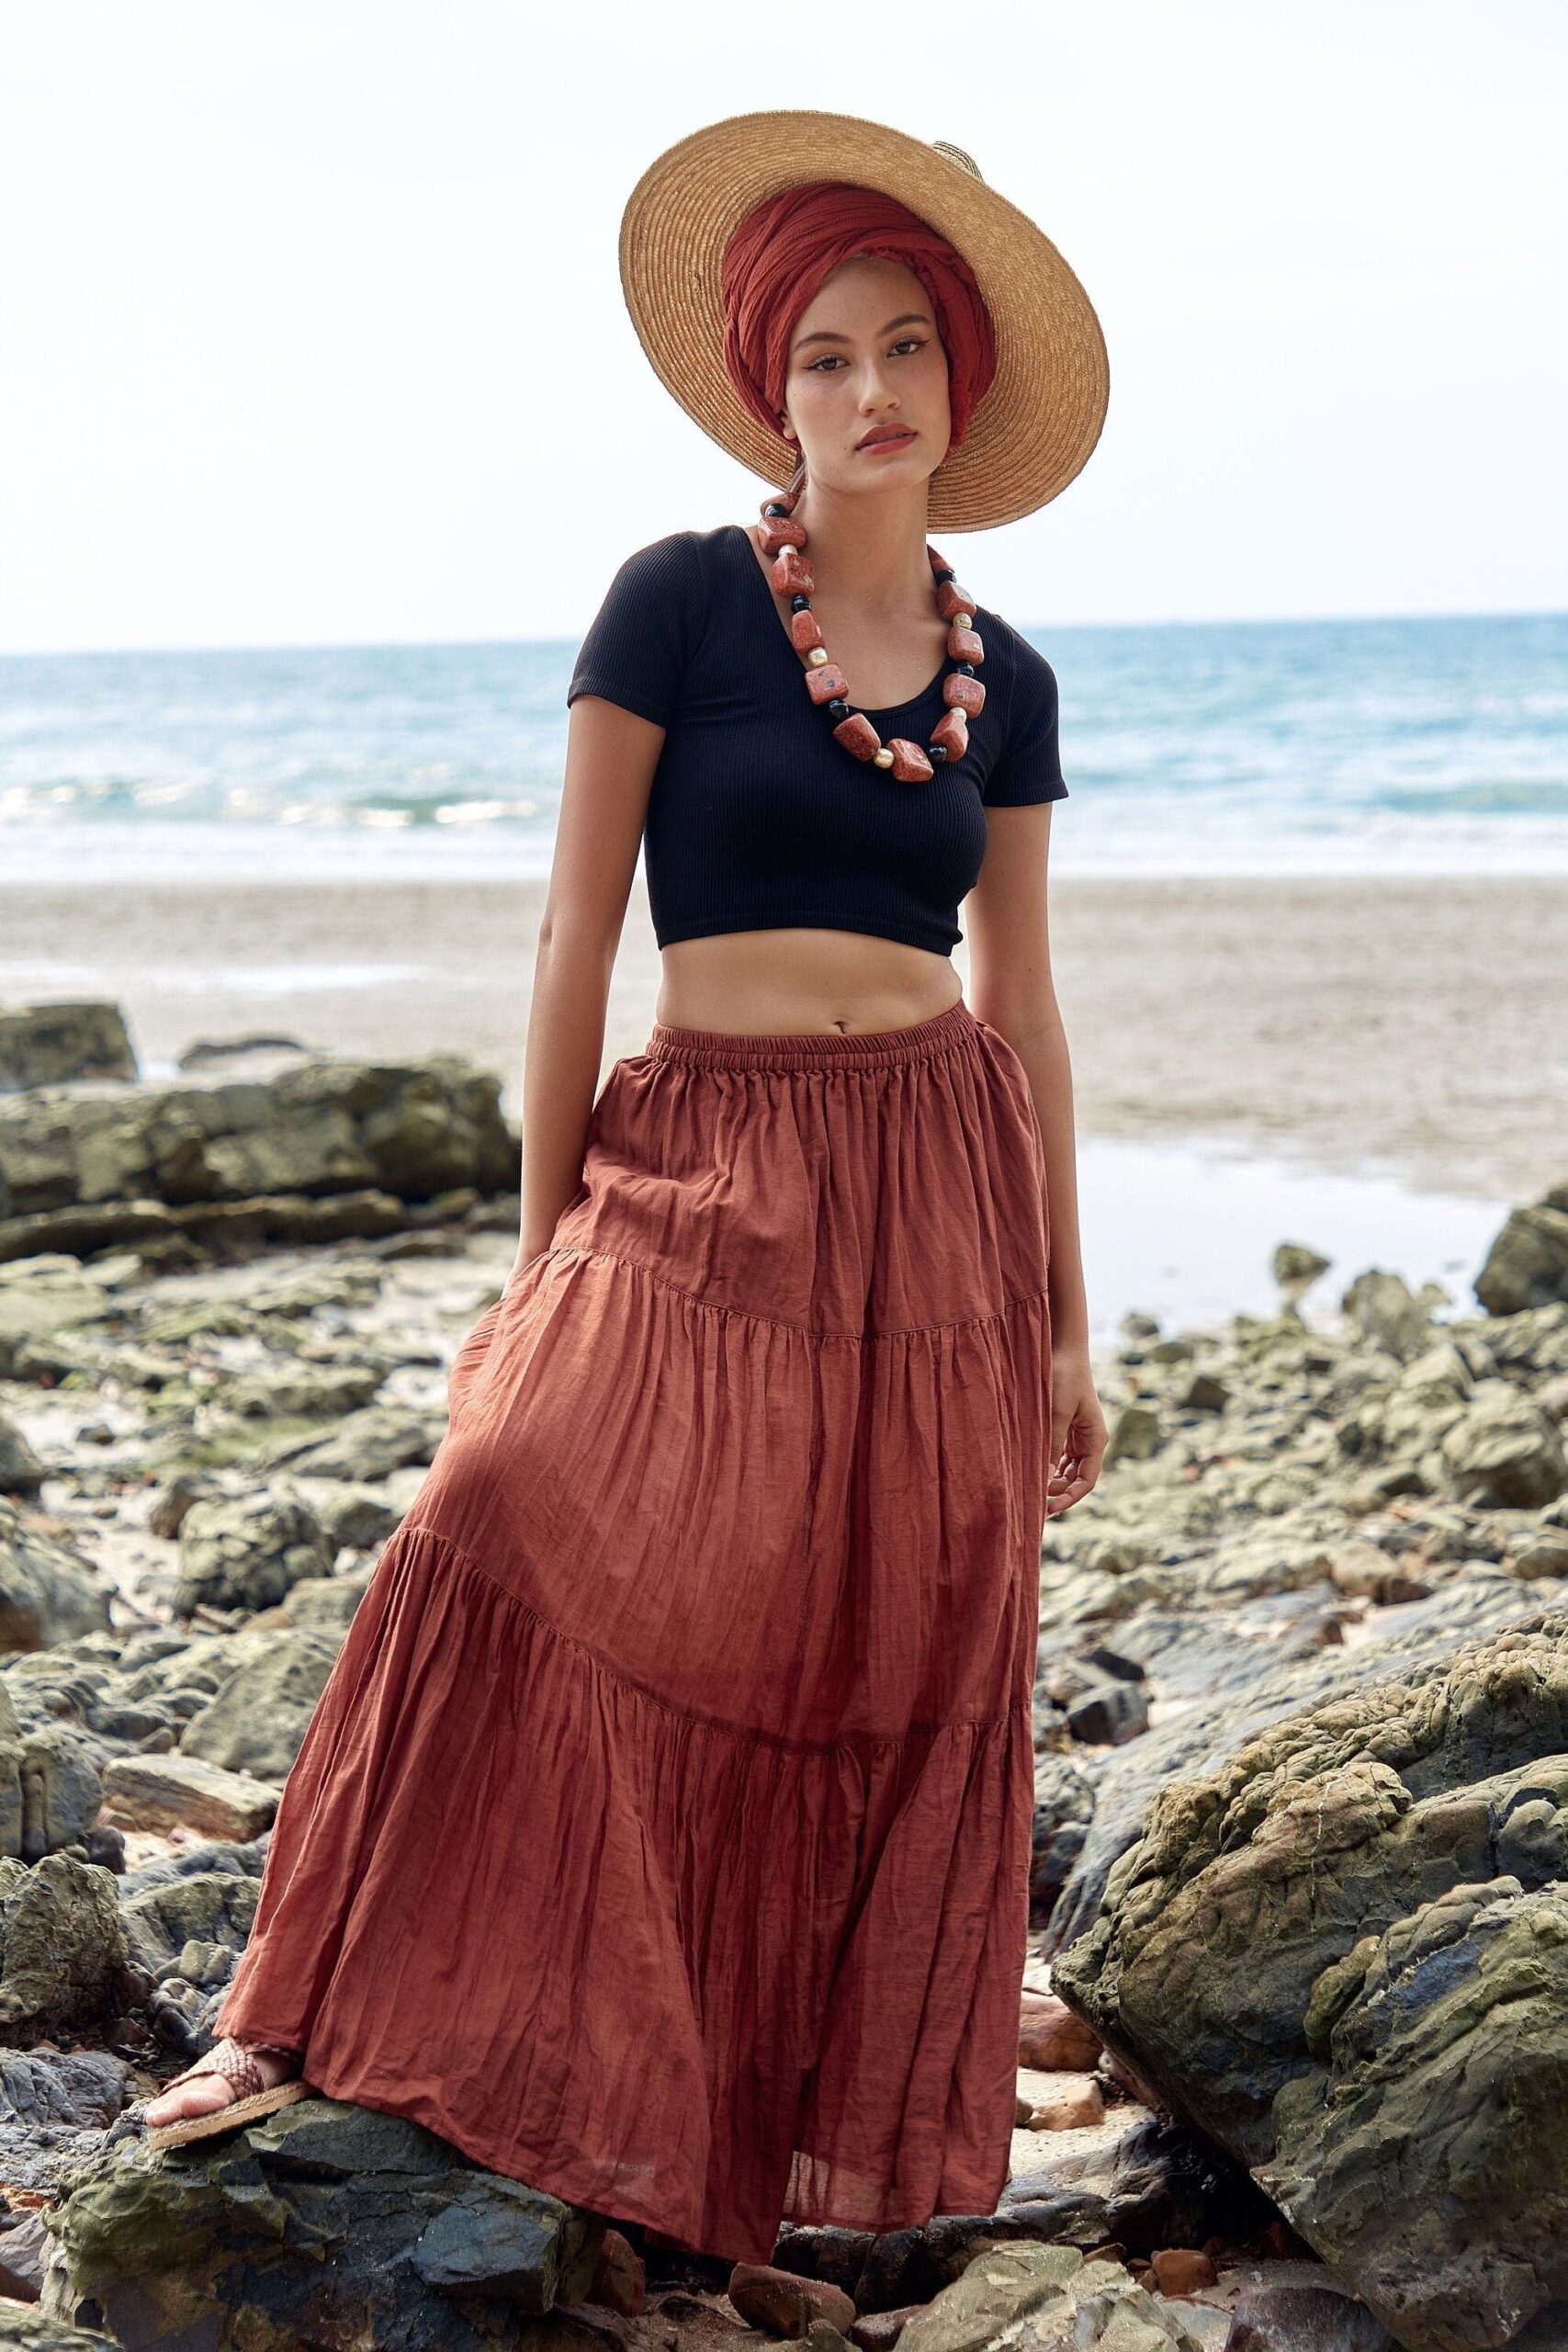 Peasant Skirt Outfit Ideas for
  Women